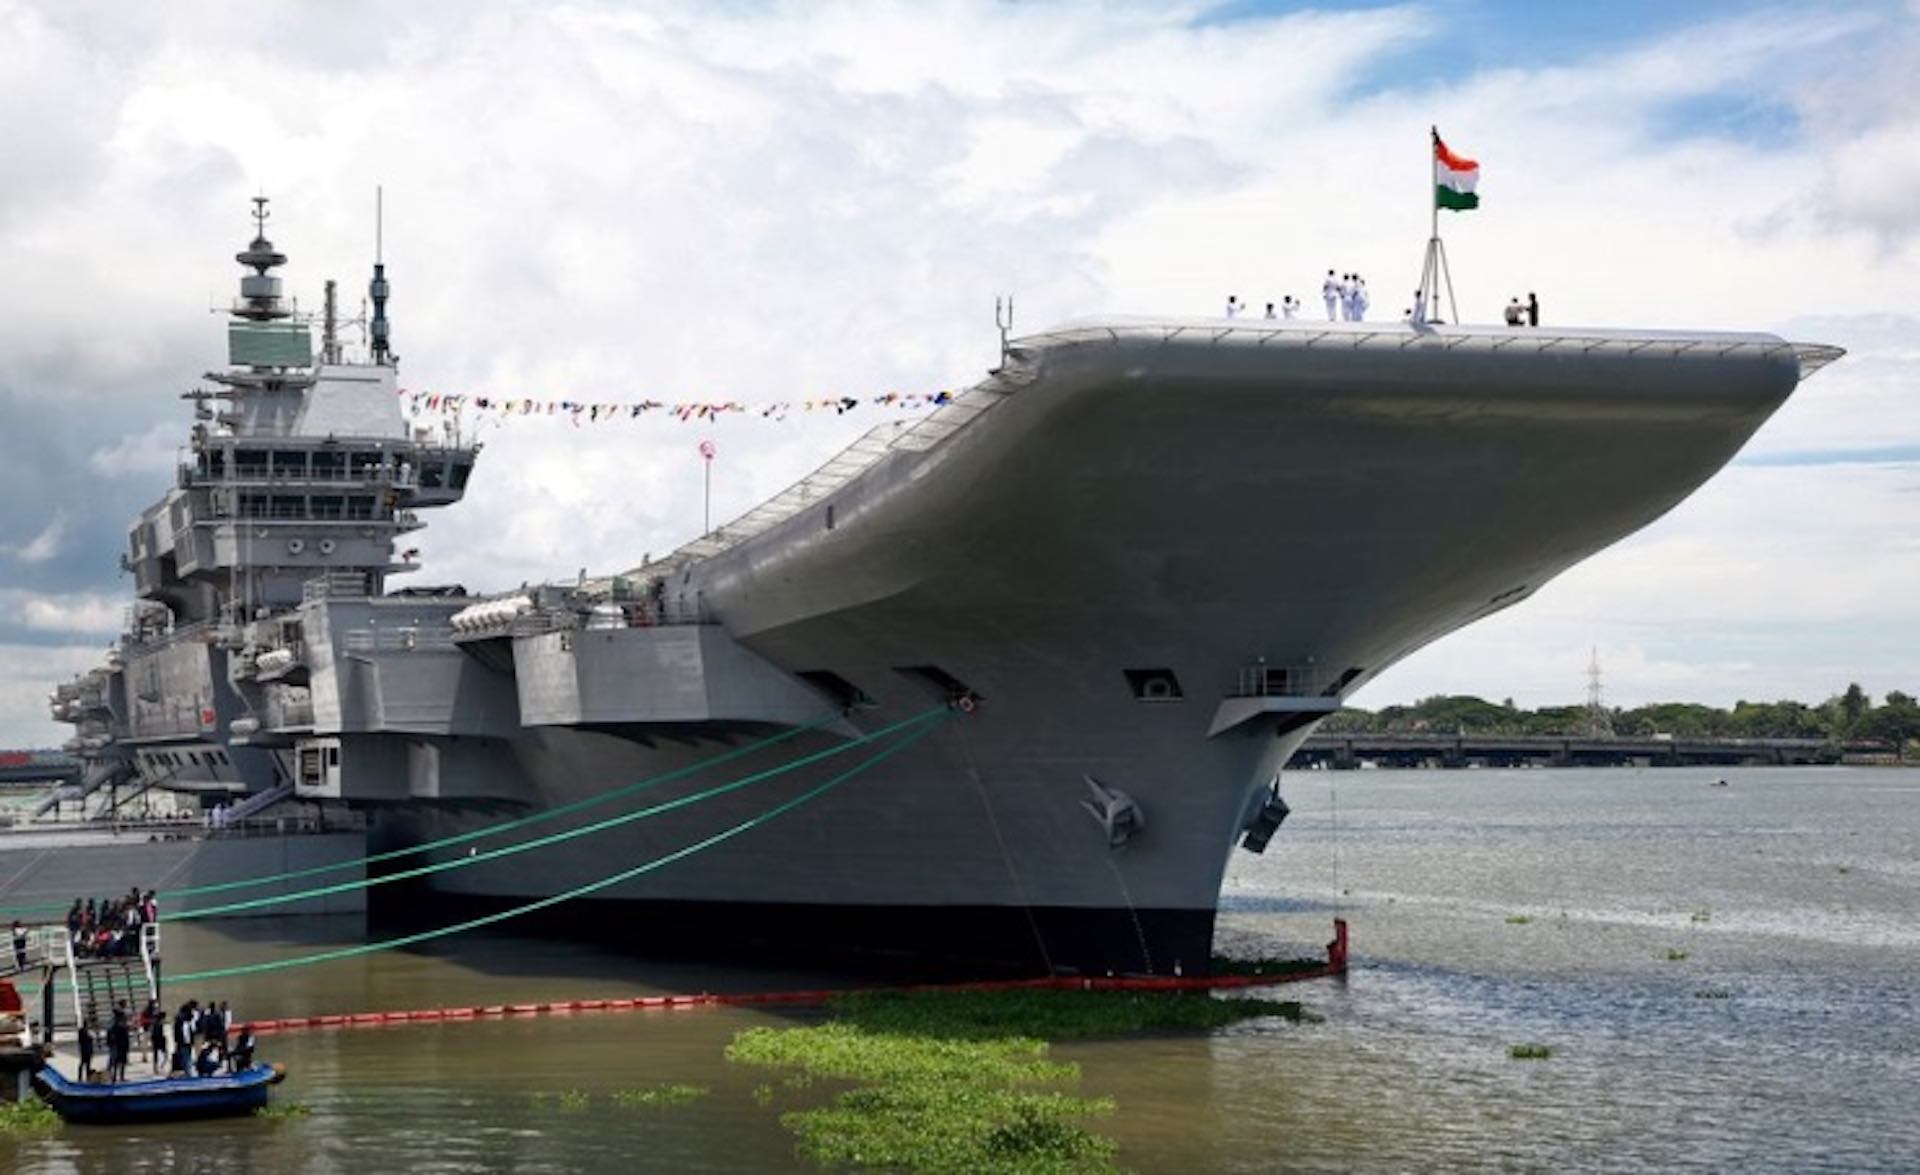  PM Modi commissions first home-built aircraft carrier in defense push